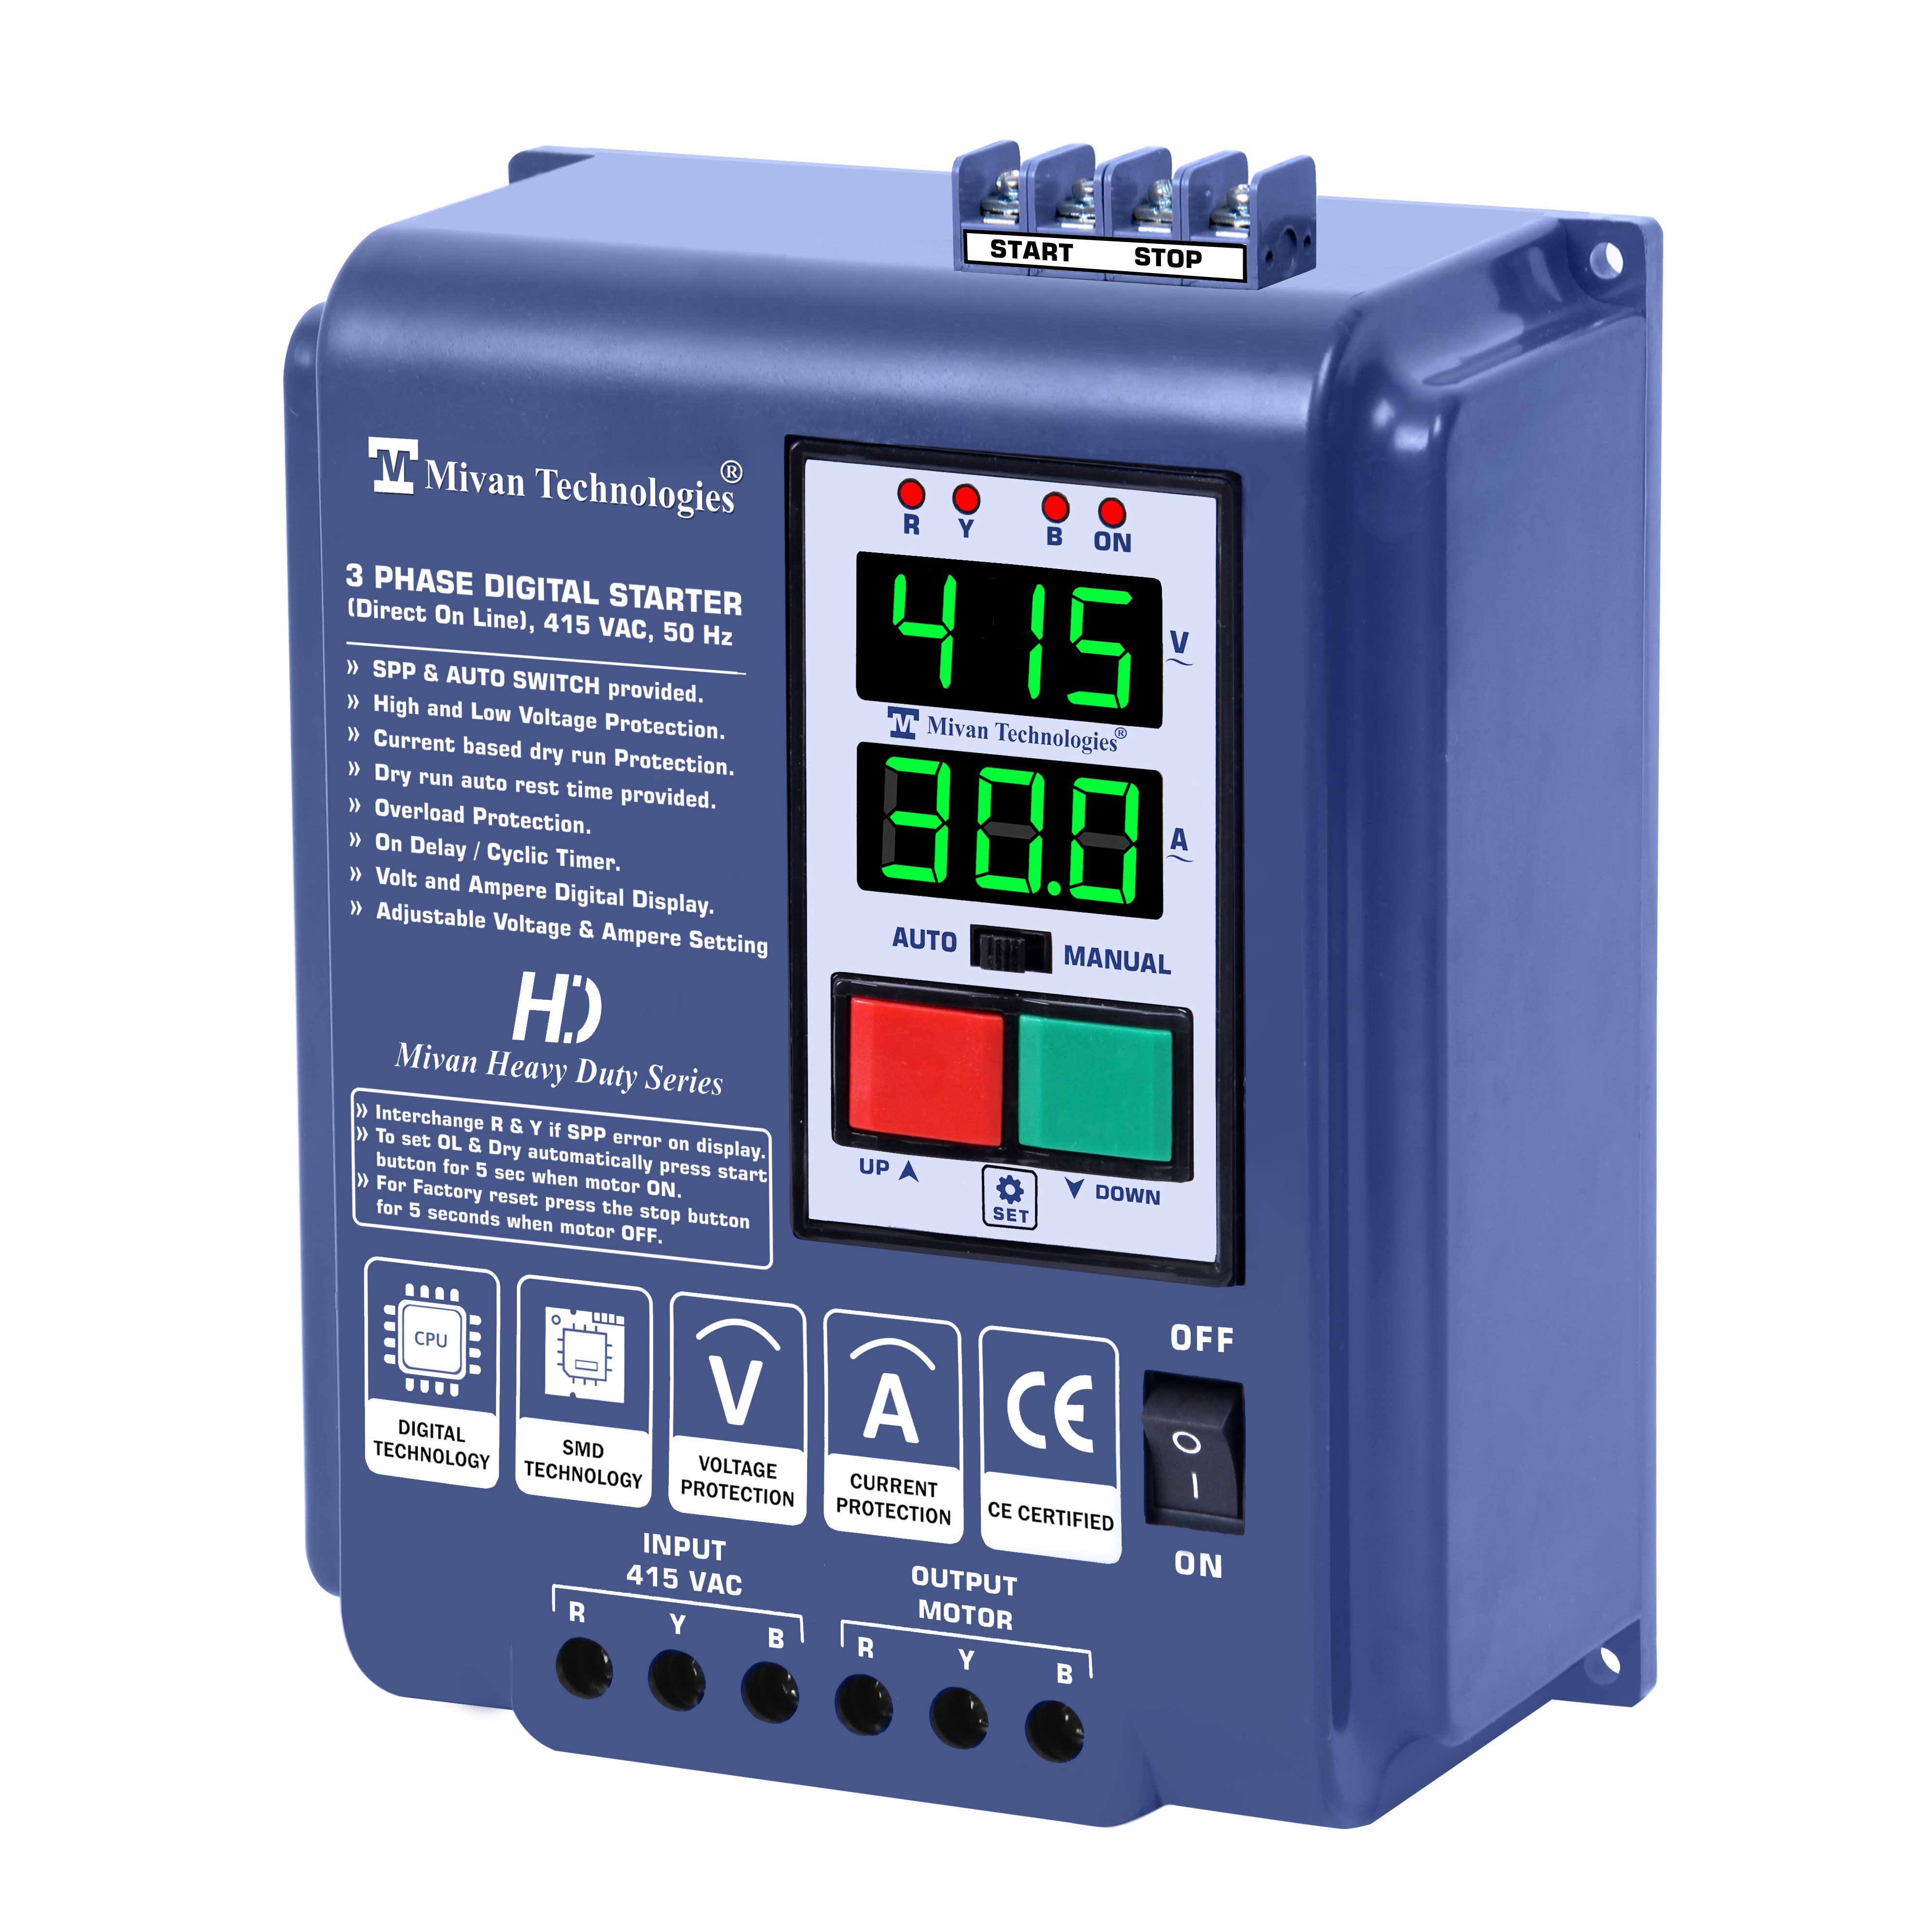 DP 301S SE 3 Phase DOL Digital Starter with external start stop connection for 3 Phase Motor Suitable up to 10 hp Motor with HV LV OL Dry protections with SPP Auto switch and cyclic timer